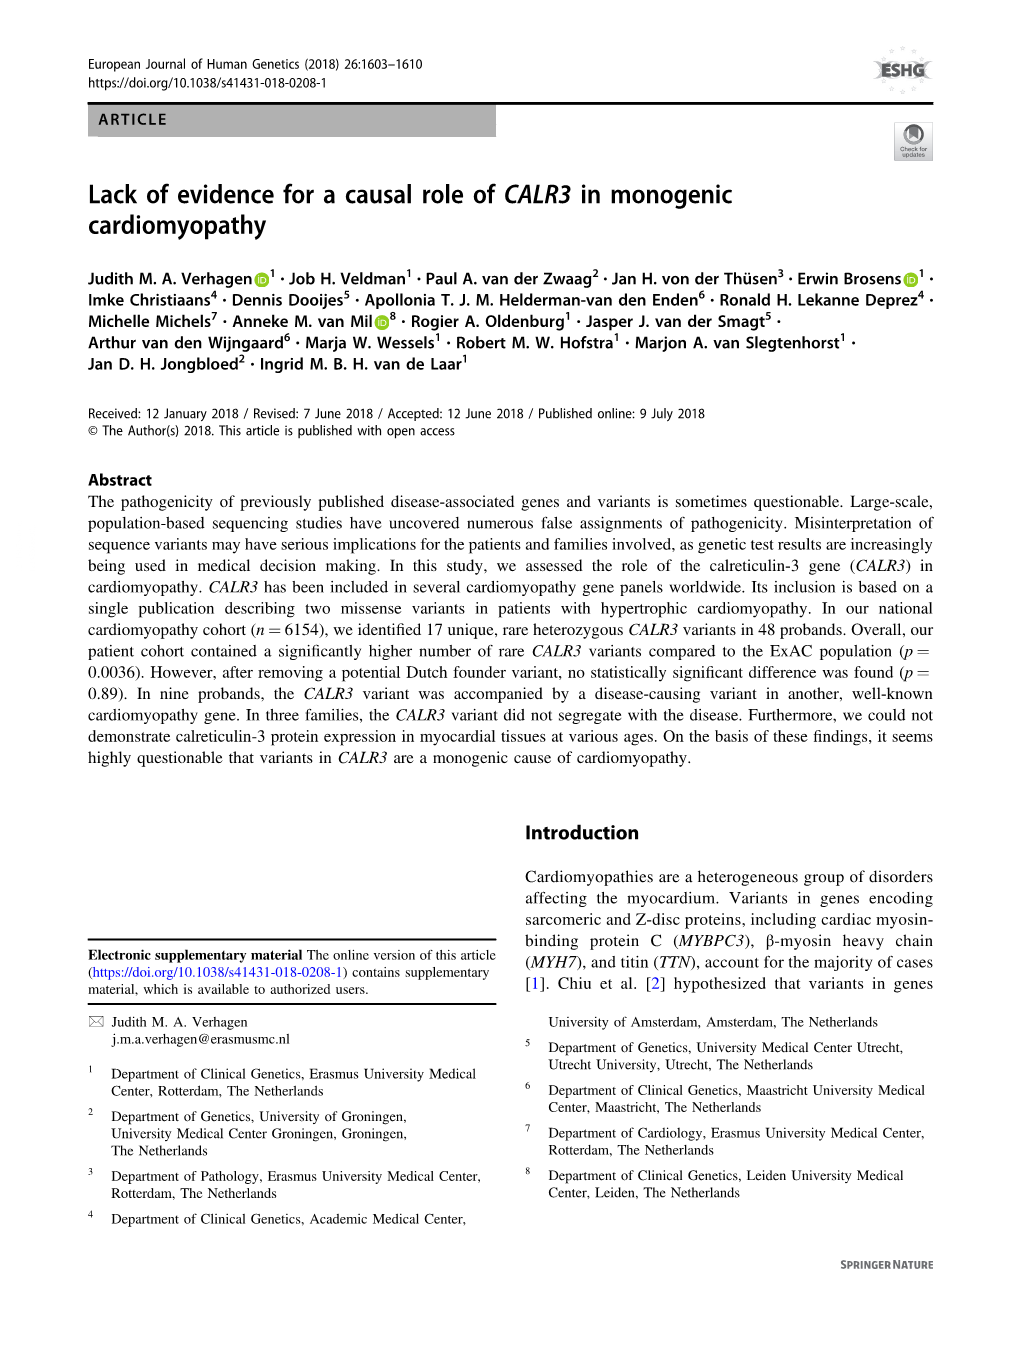 Lack of Evidence for a Causal Role of CALR3 in Monogenic Cardiomyopathy